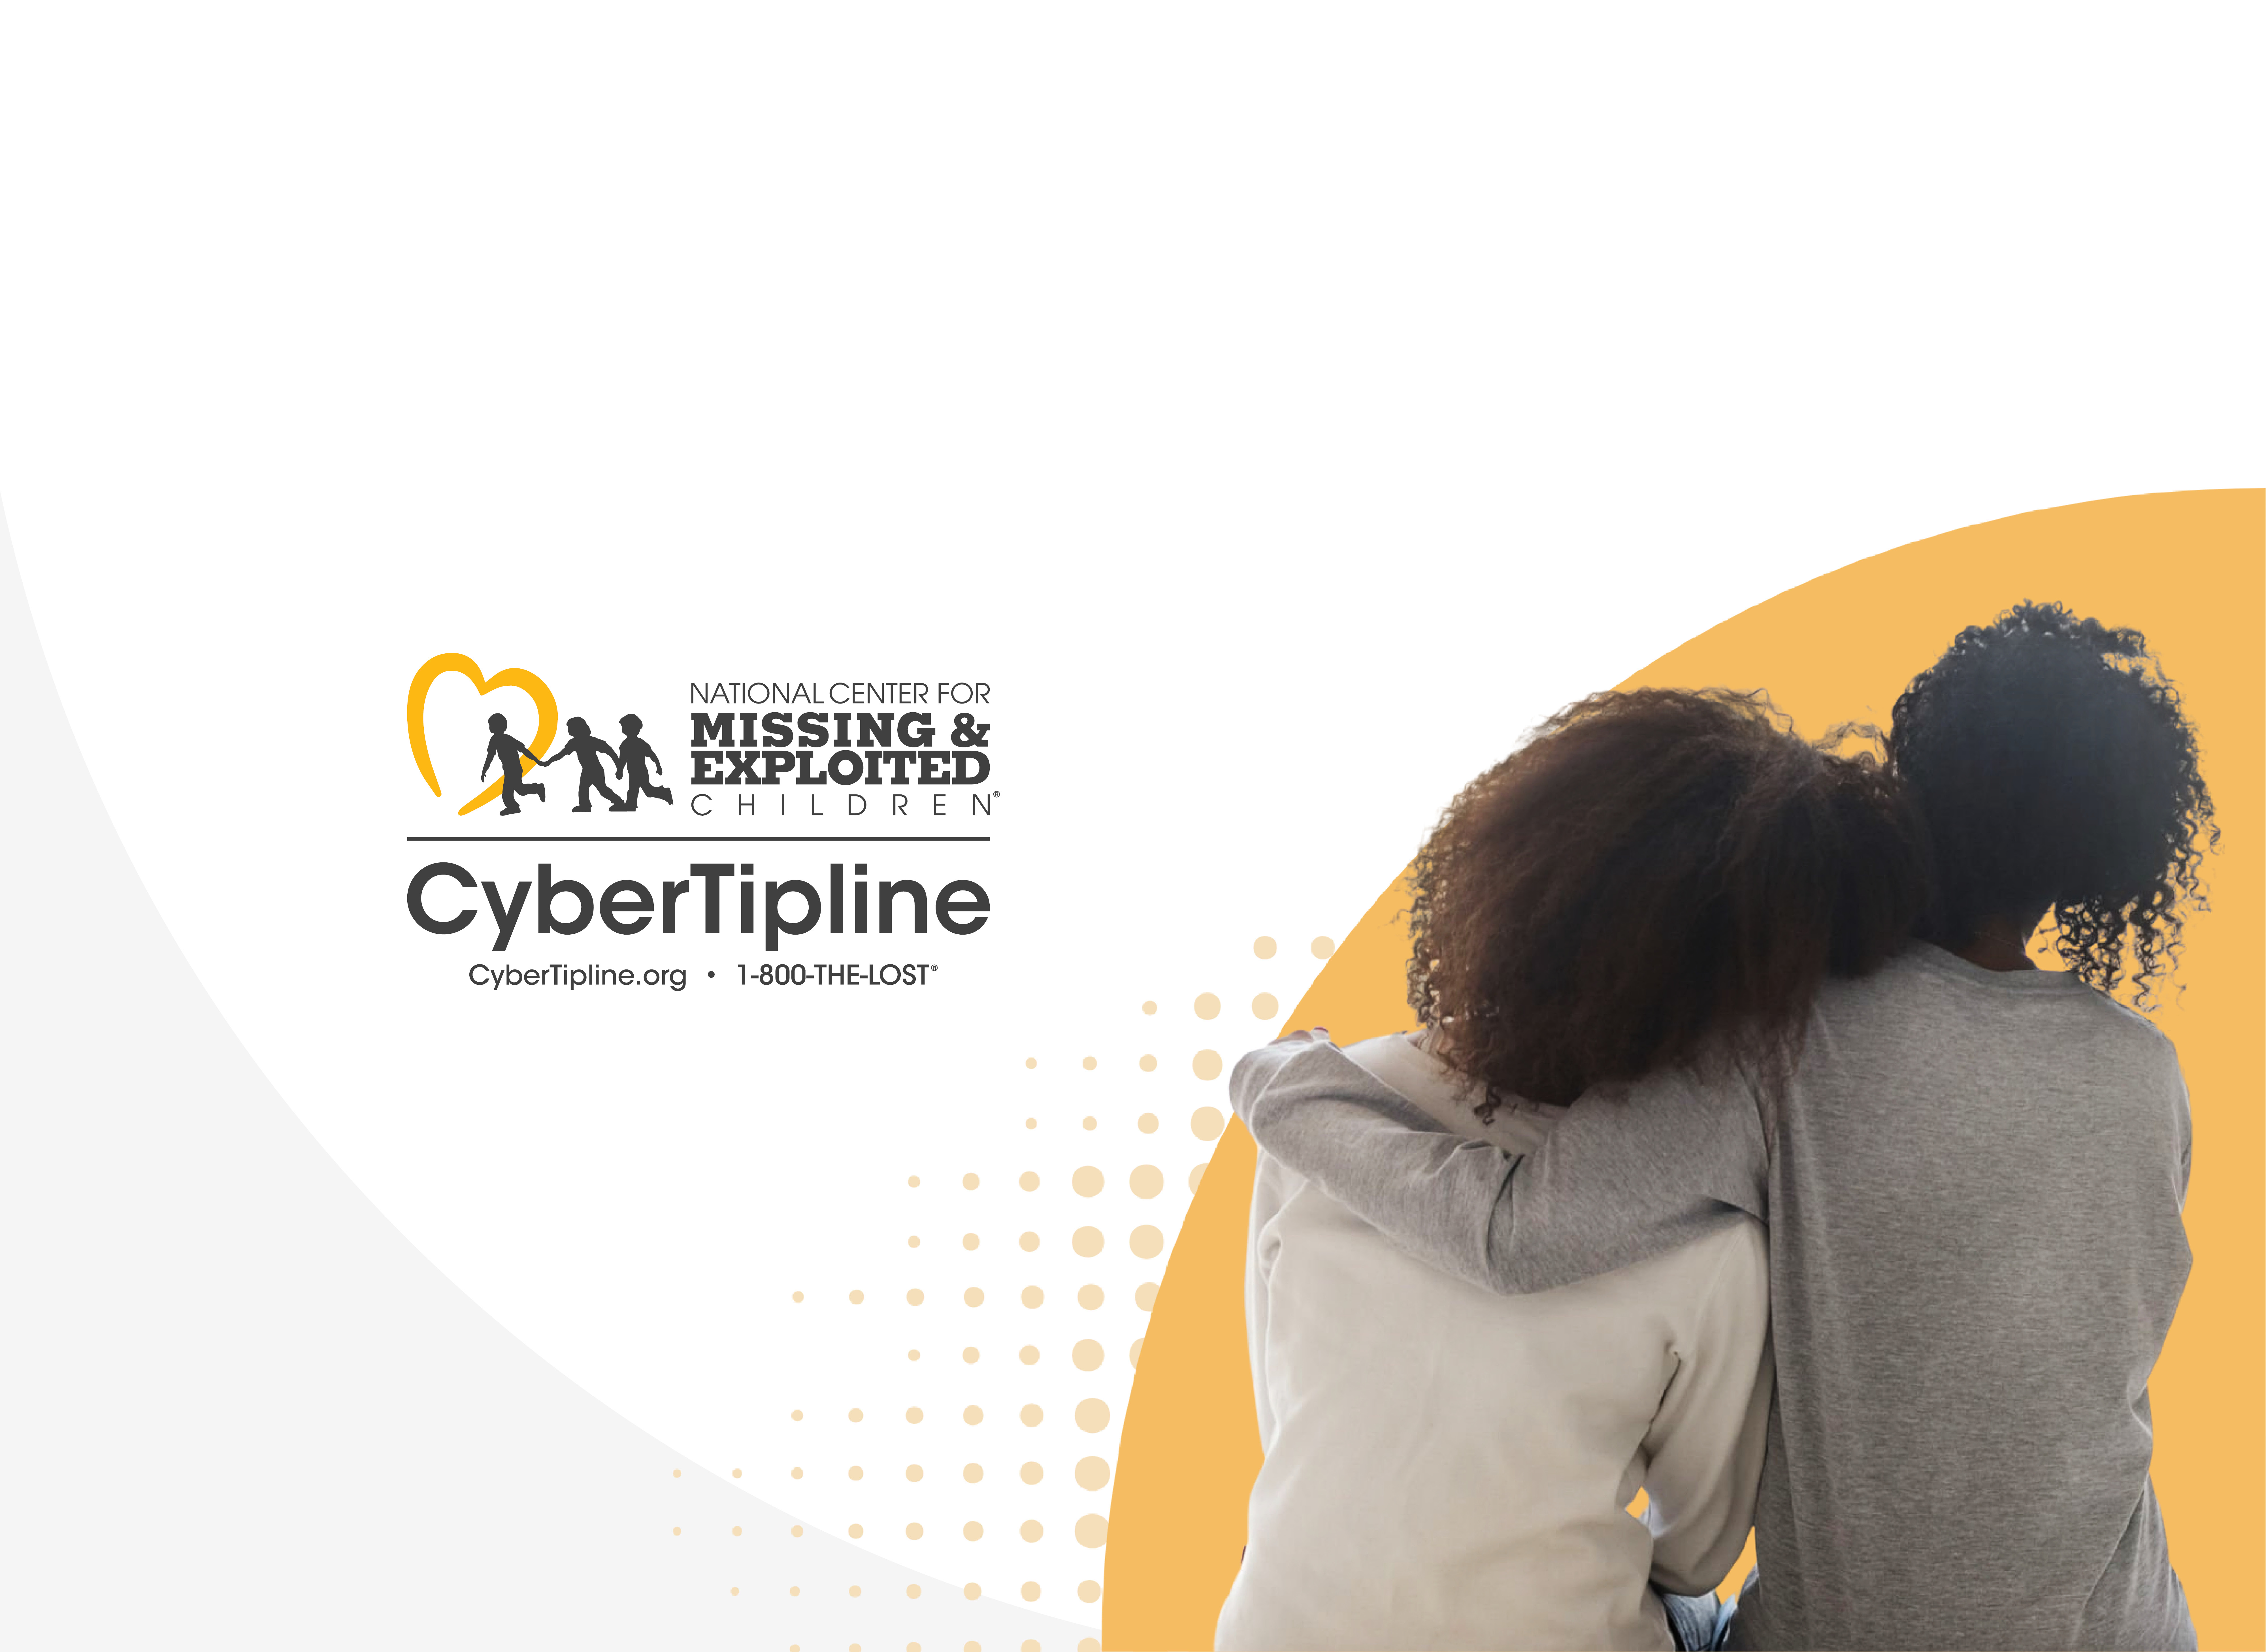 cybertipline logo (cybertipline.org, 1-800-THE-LOST0 with woman and child sitting with arms around each other and backs to camera